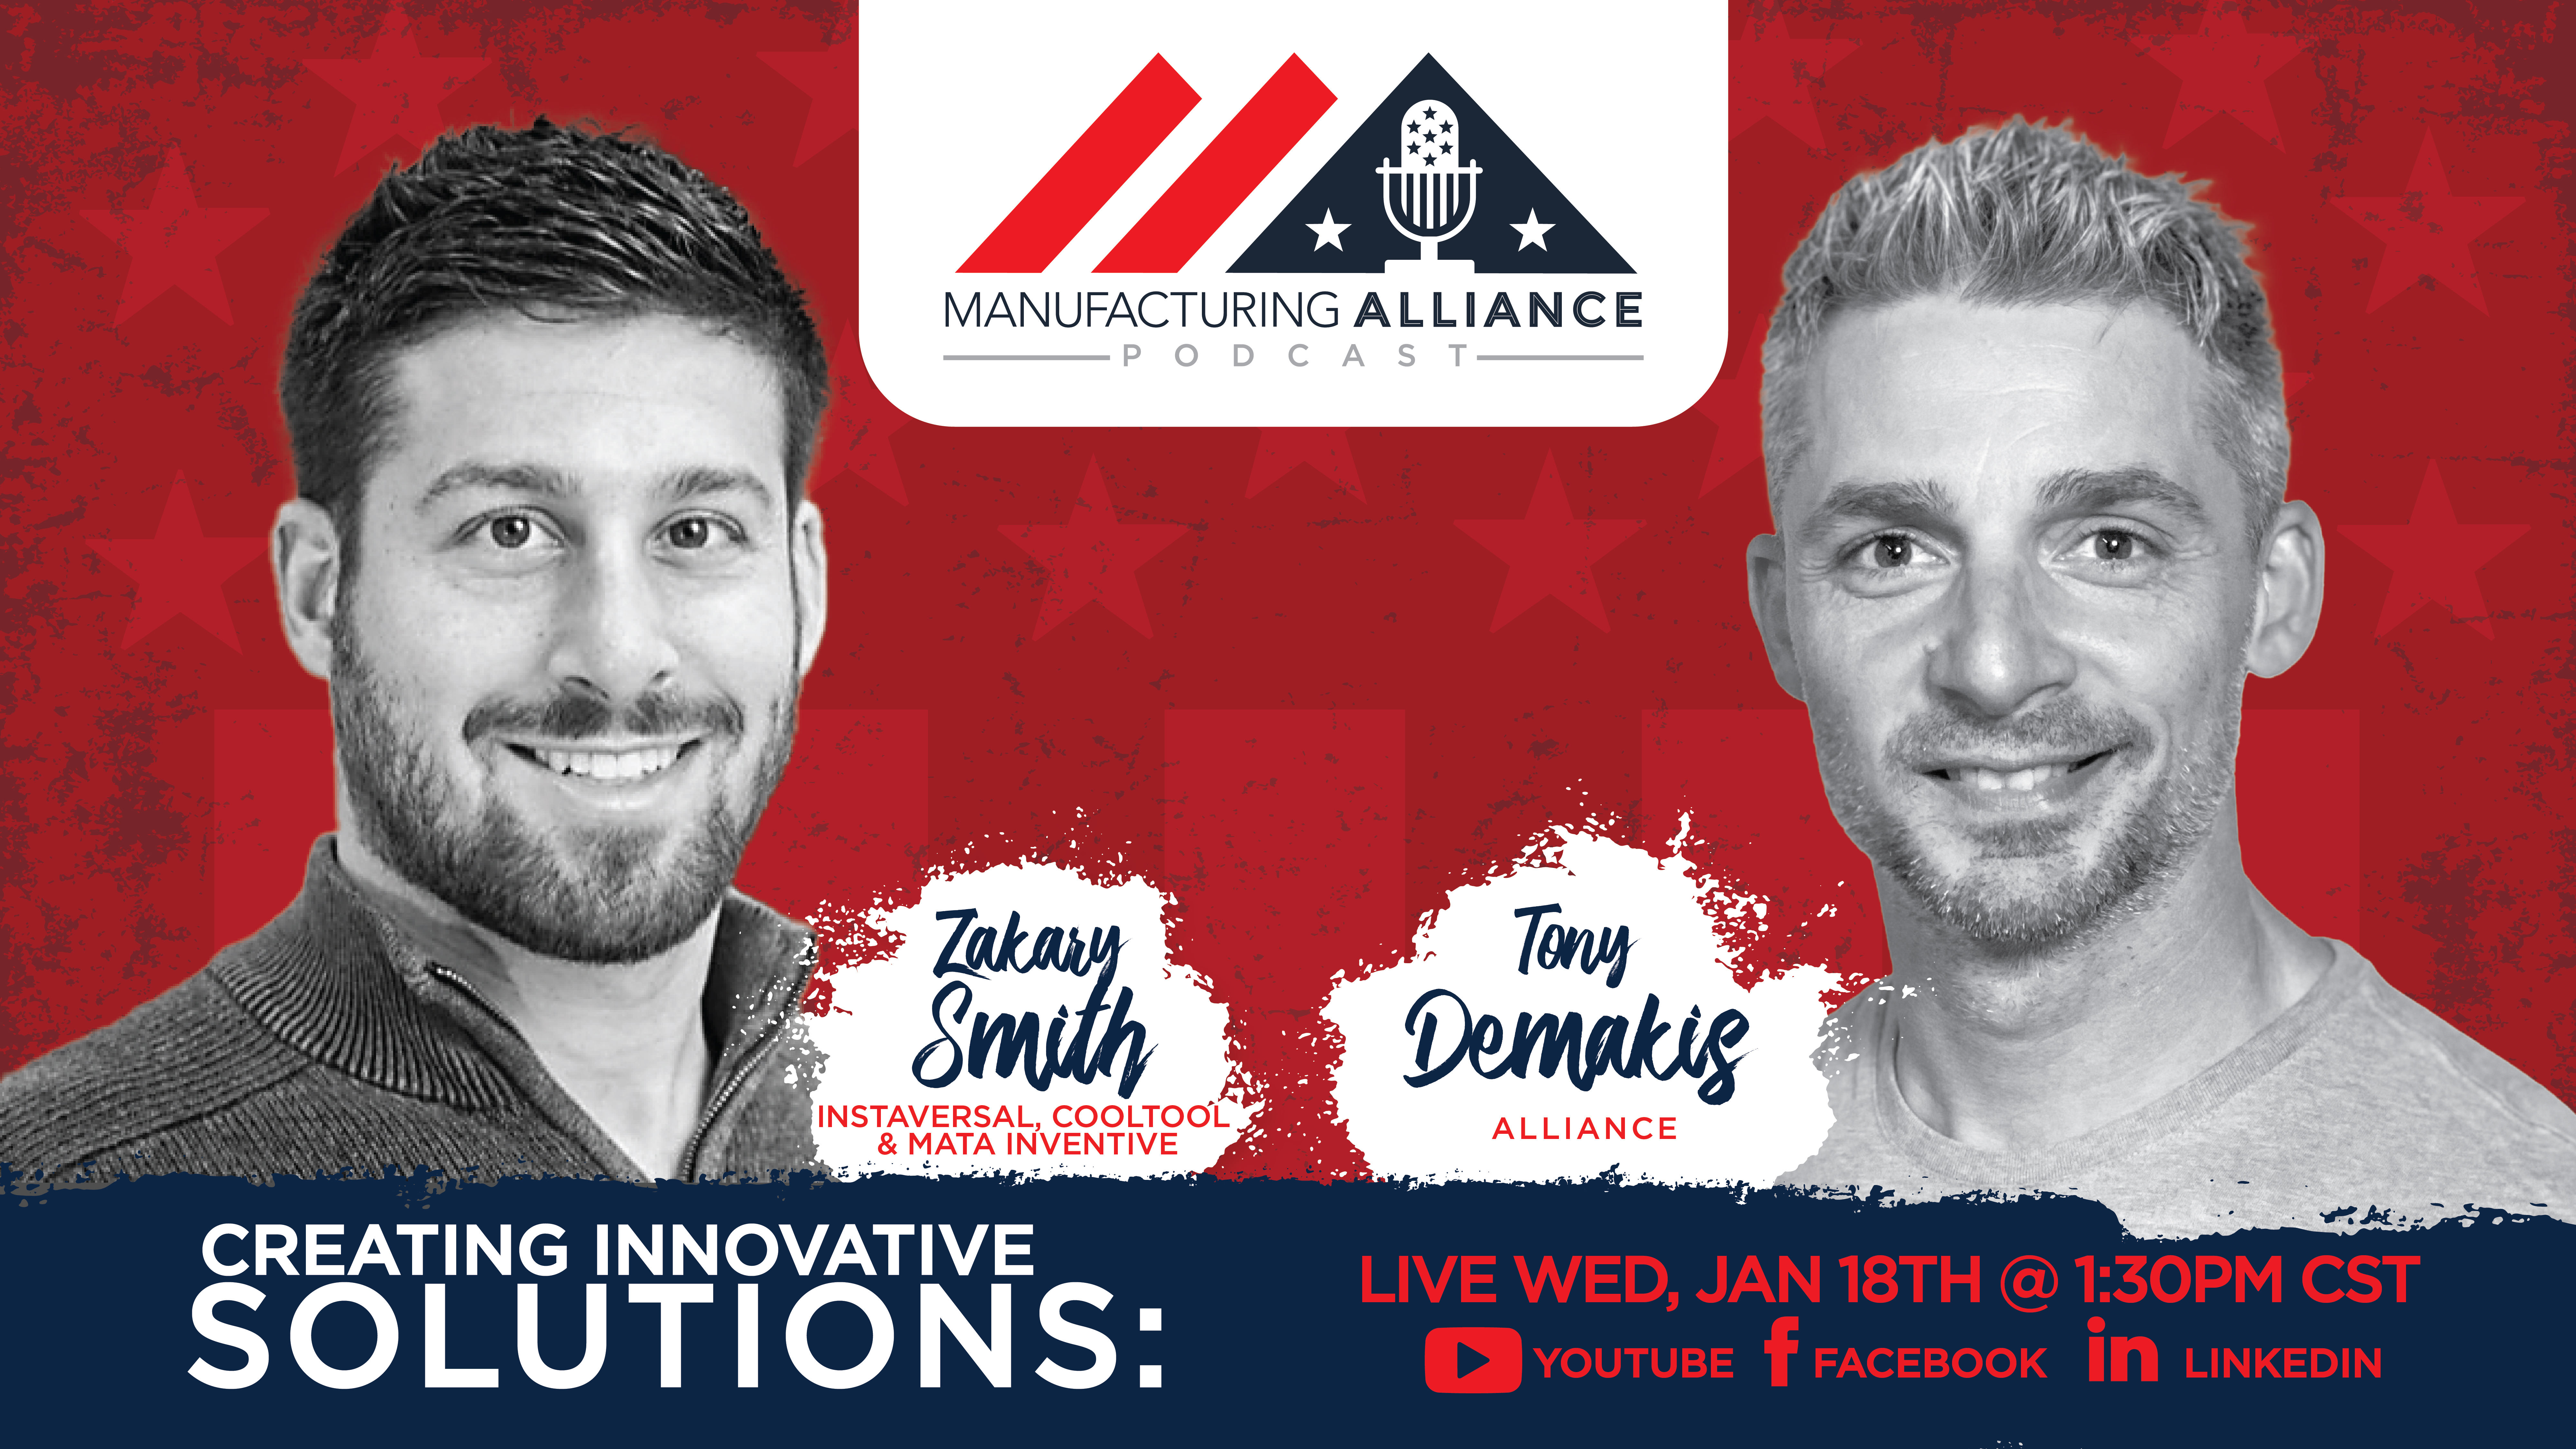 The Manufacturing Alliance Podcast Presents: Zakary Smith | Instaversal, CoolTool & Mata Inventive